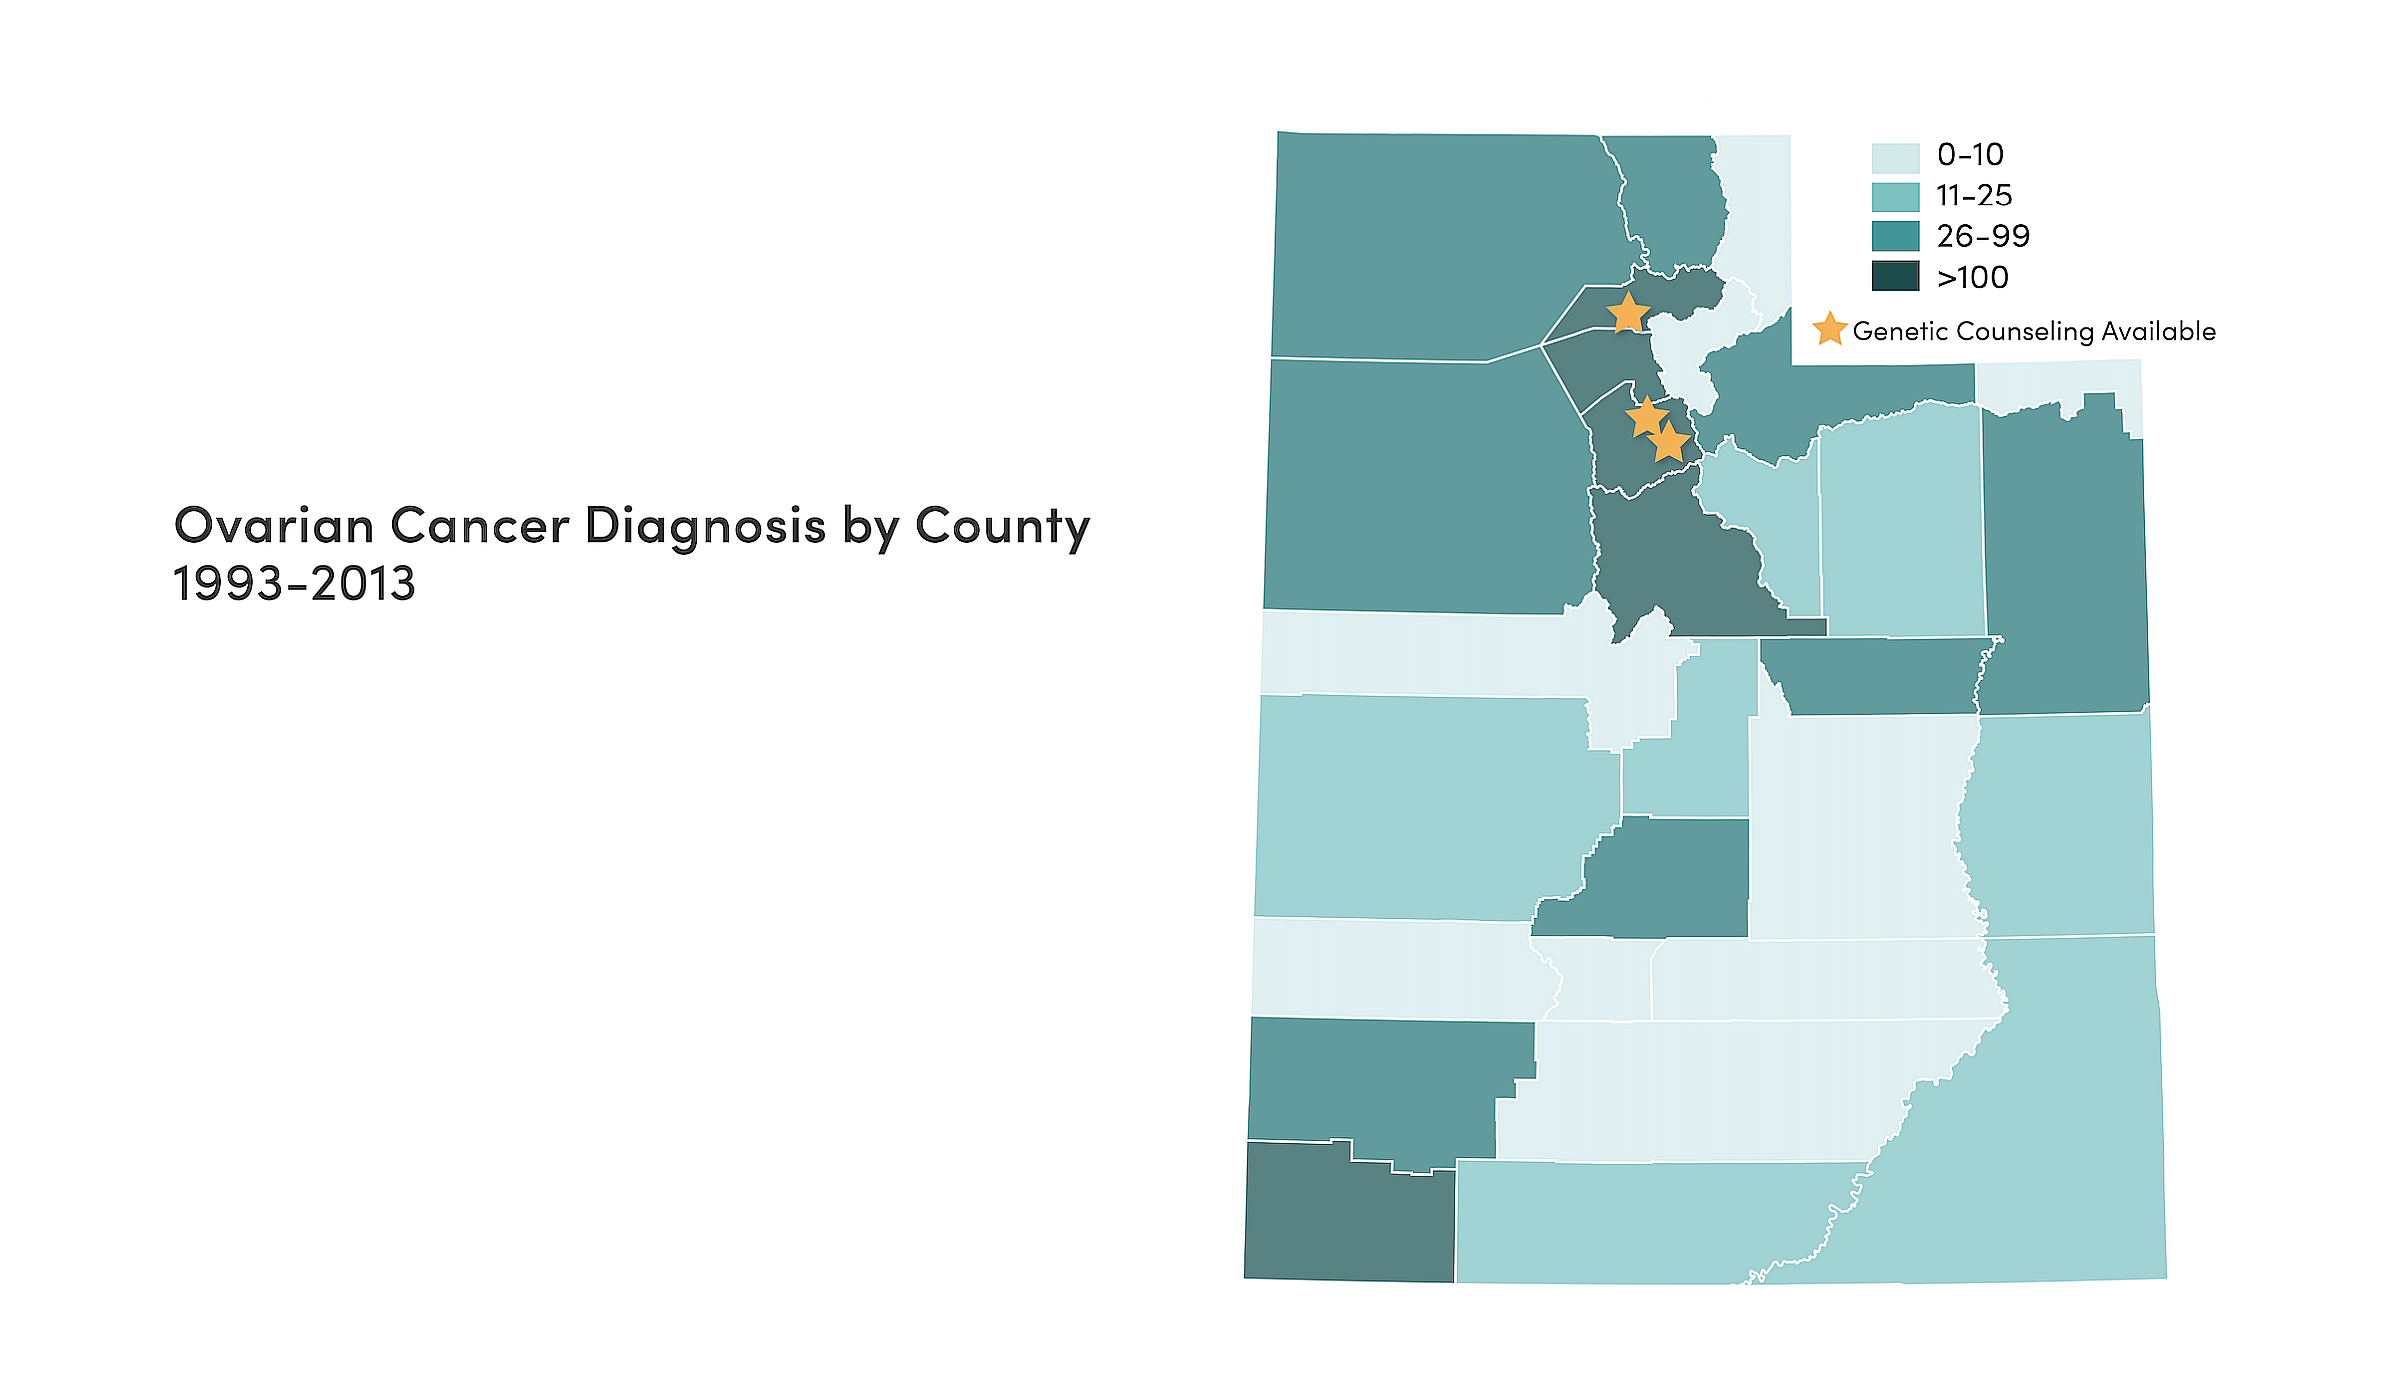 Graphic of ovarian cancer diagnoses by county in Utah